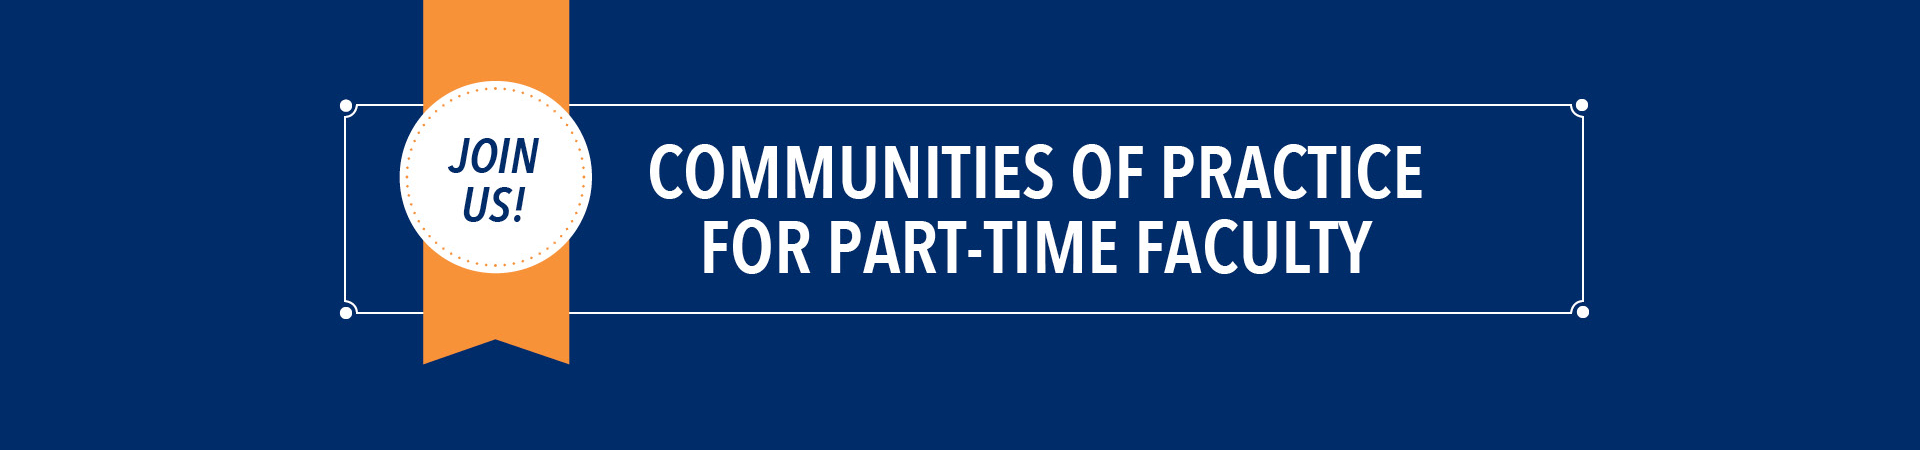 Communities of Practice for Part-Time Faculty